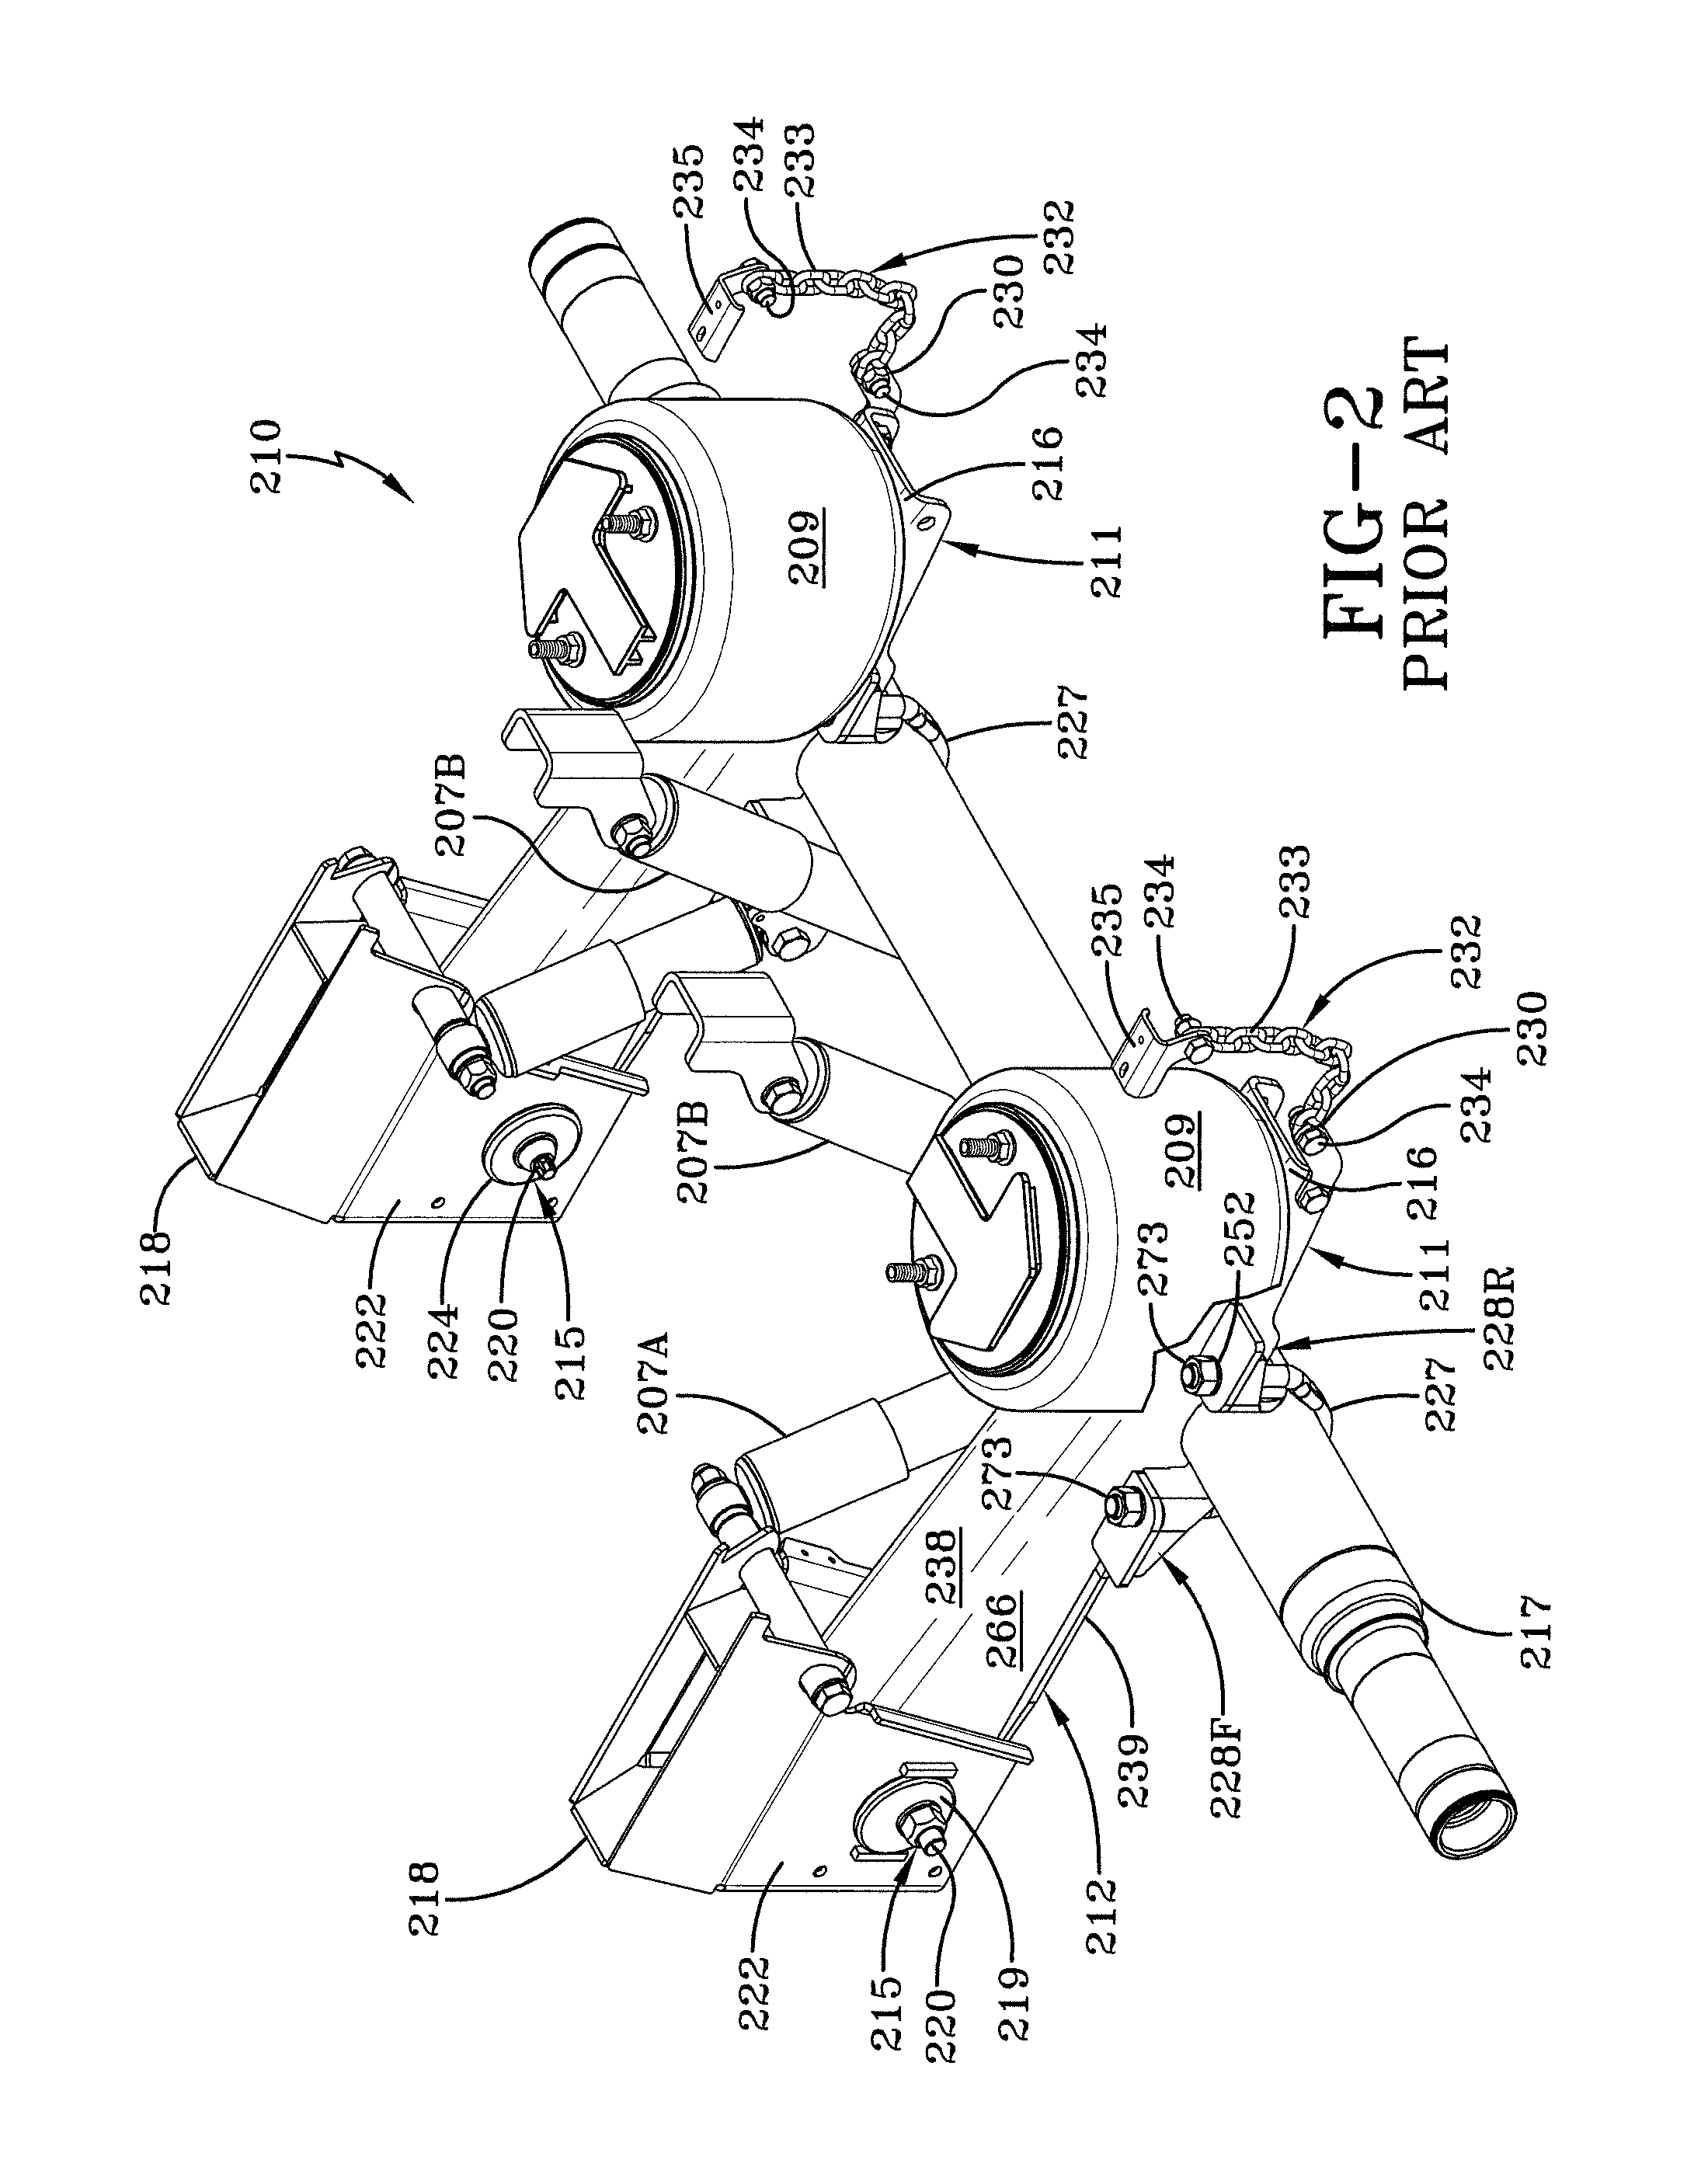 Mechanical stop for axle/suspension systems